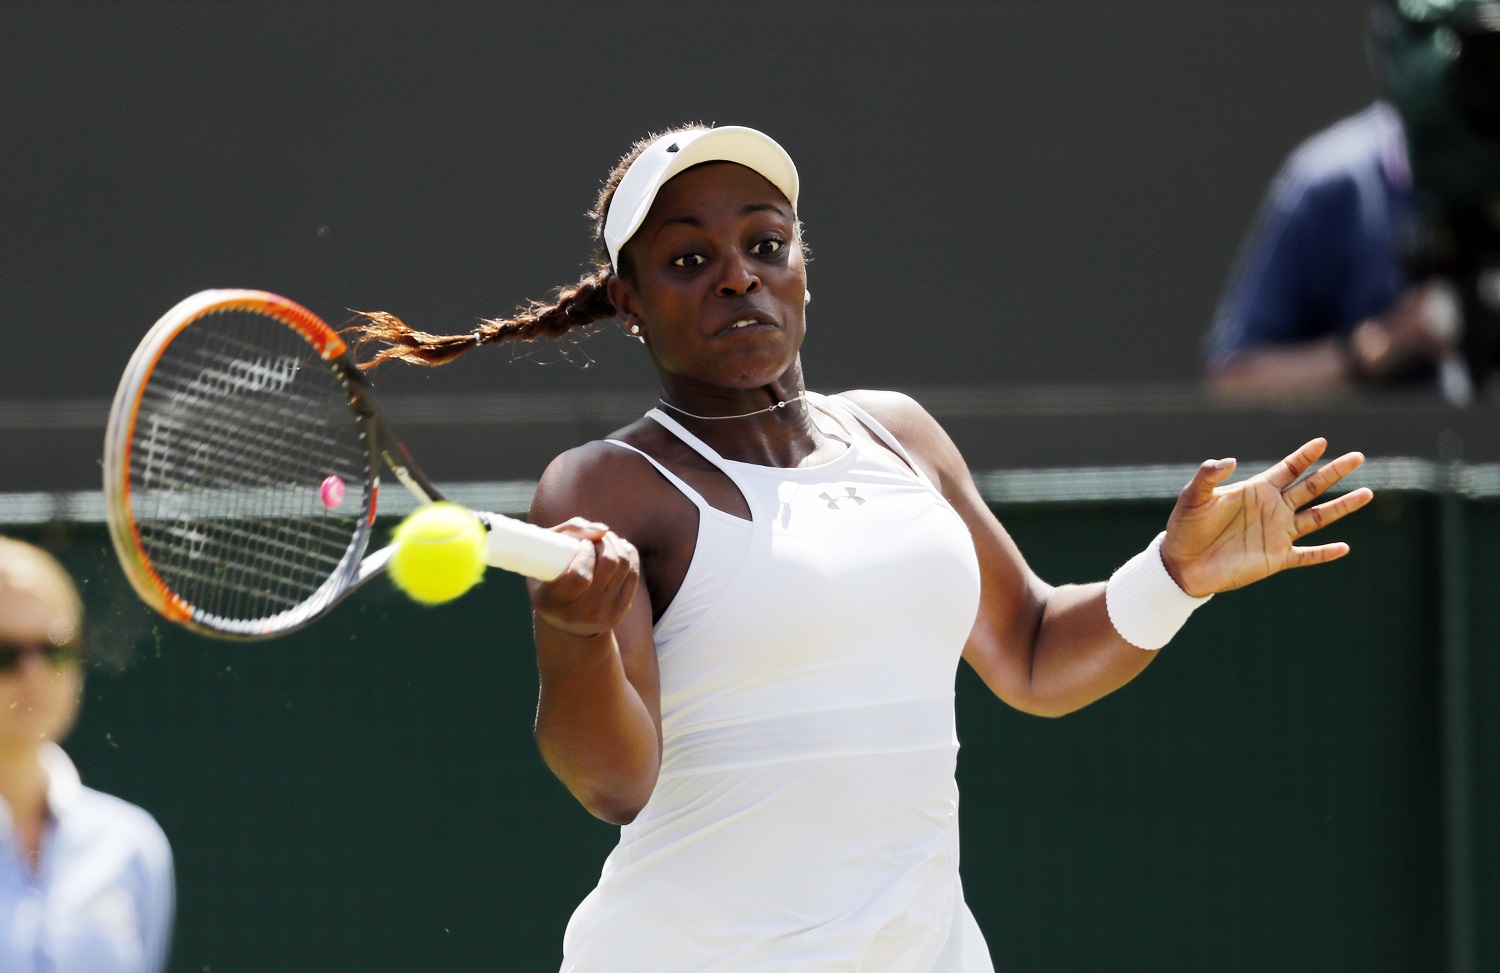 Sloane Stephens of the U.S returns to Svetlana Kuznetsova of Russia during their women's singles match on day seven of the Wimbledon Tennis Championships in London, Sunday, July 3, 2016. (AP Photo/Ben Curtis)